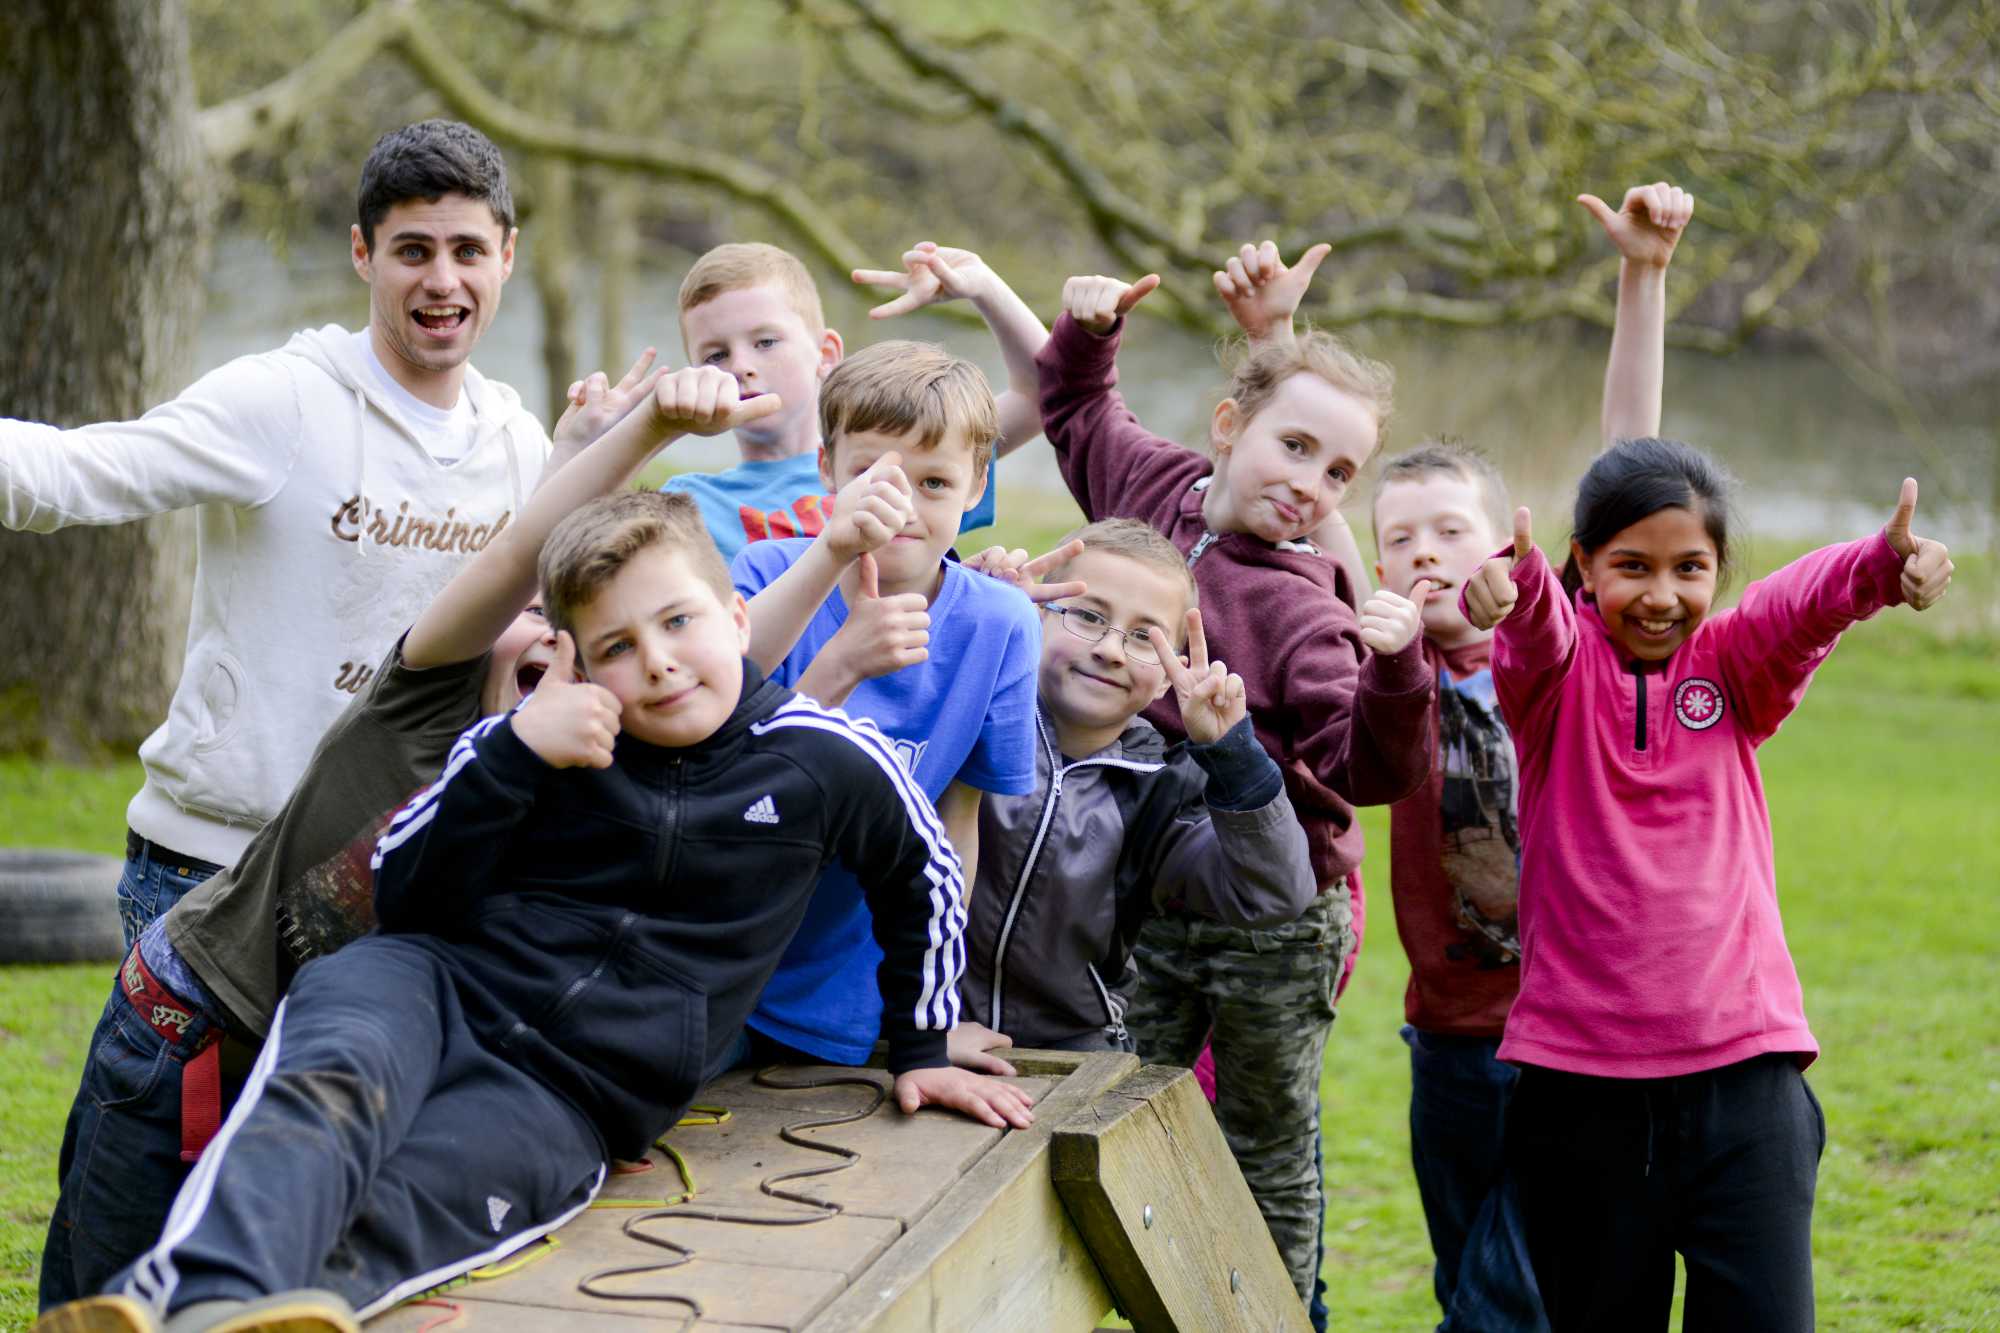 Group of children outdoors with thumbs up